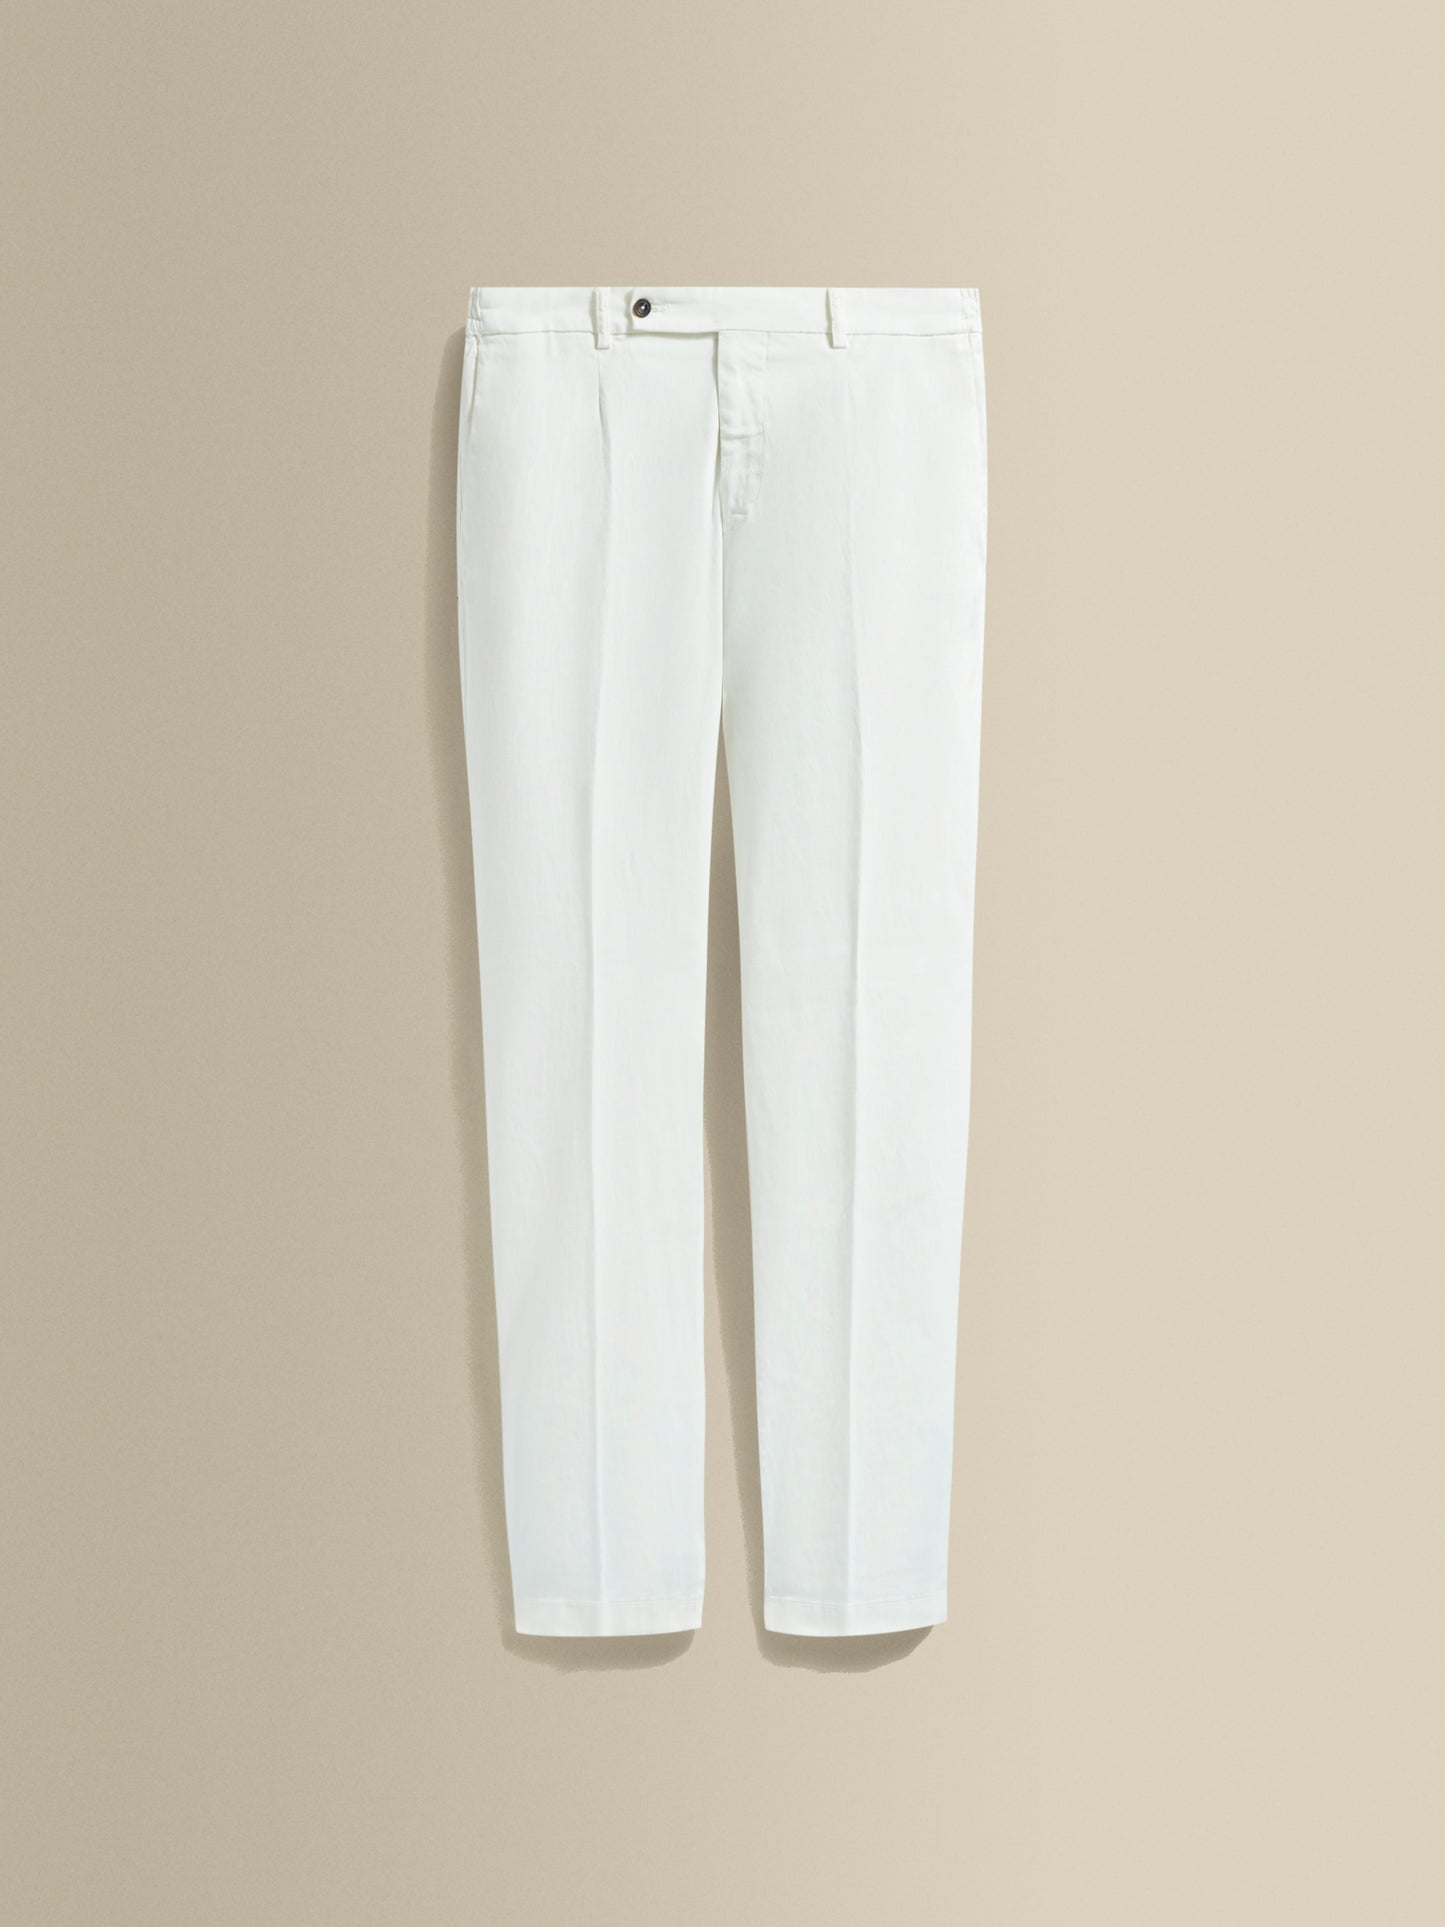 Cotton Easy Fit Flate Front Chinos White Product Image